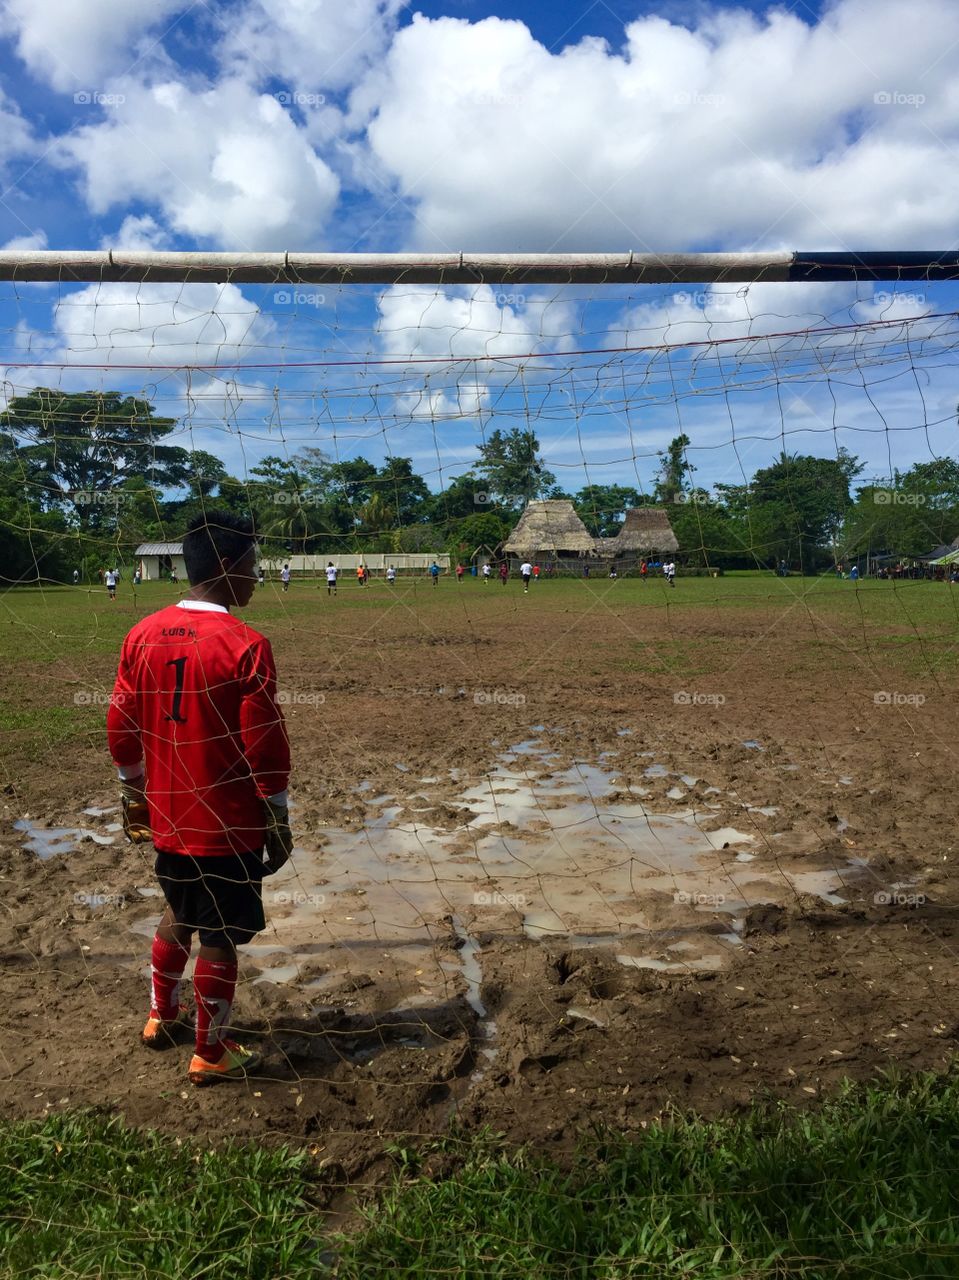 Football match in the Amazon rainforest! Beautiful greens and reds in this photo! 